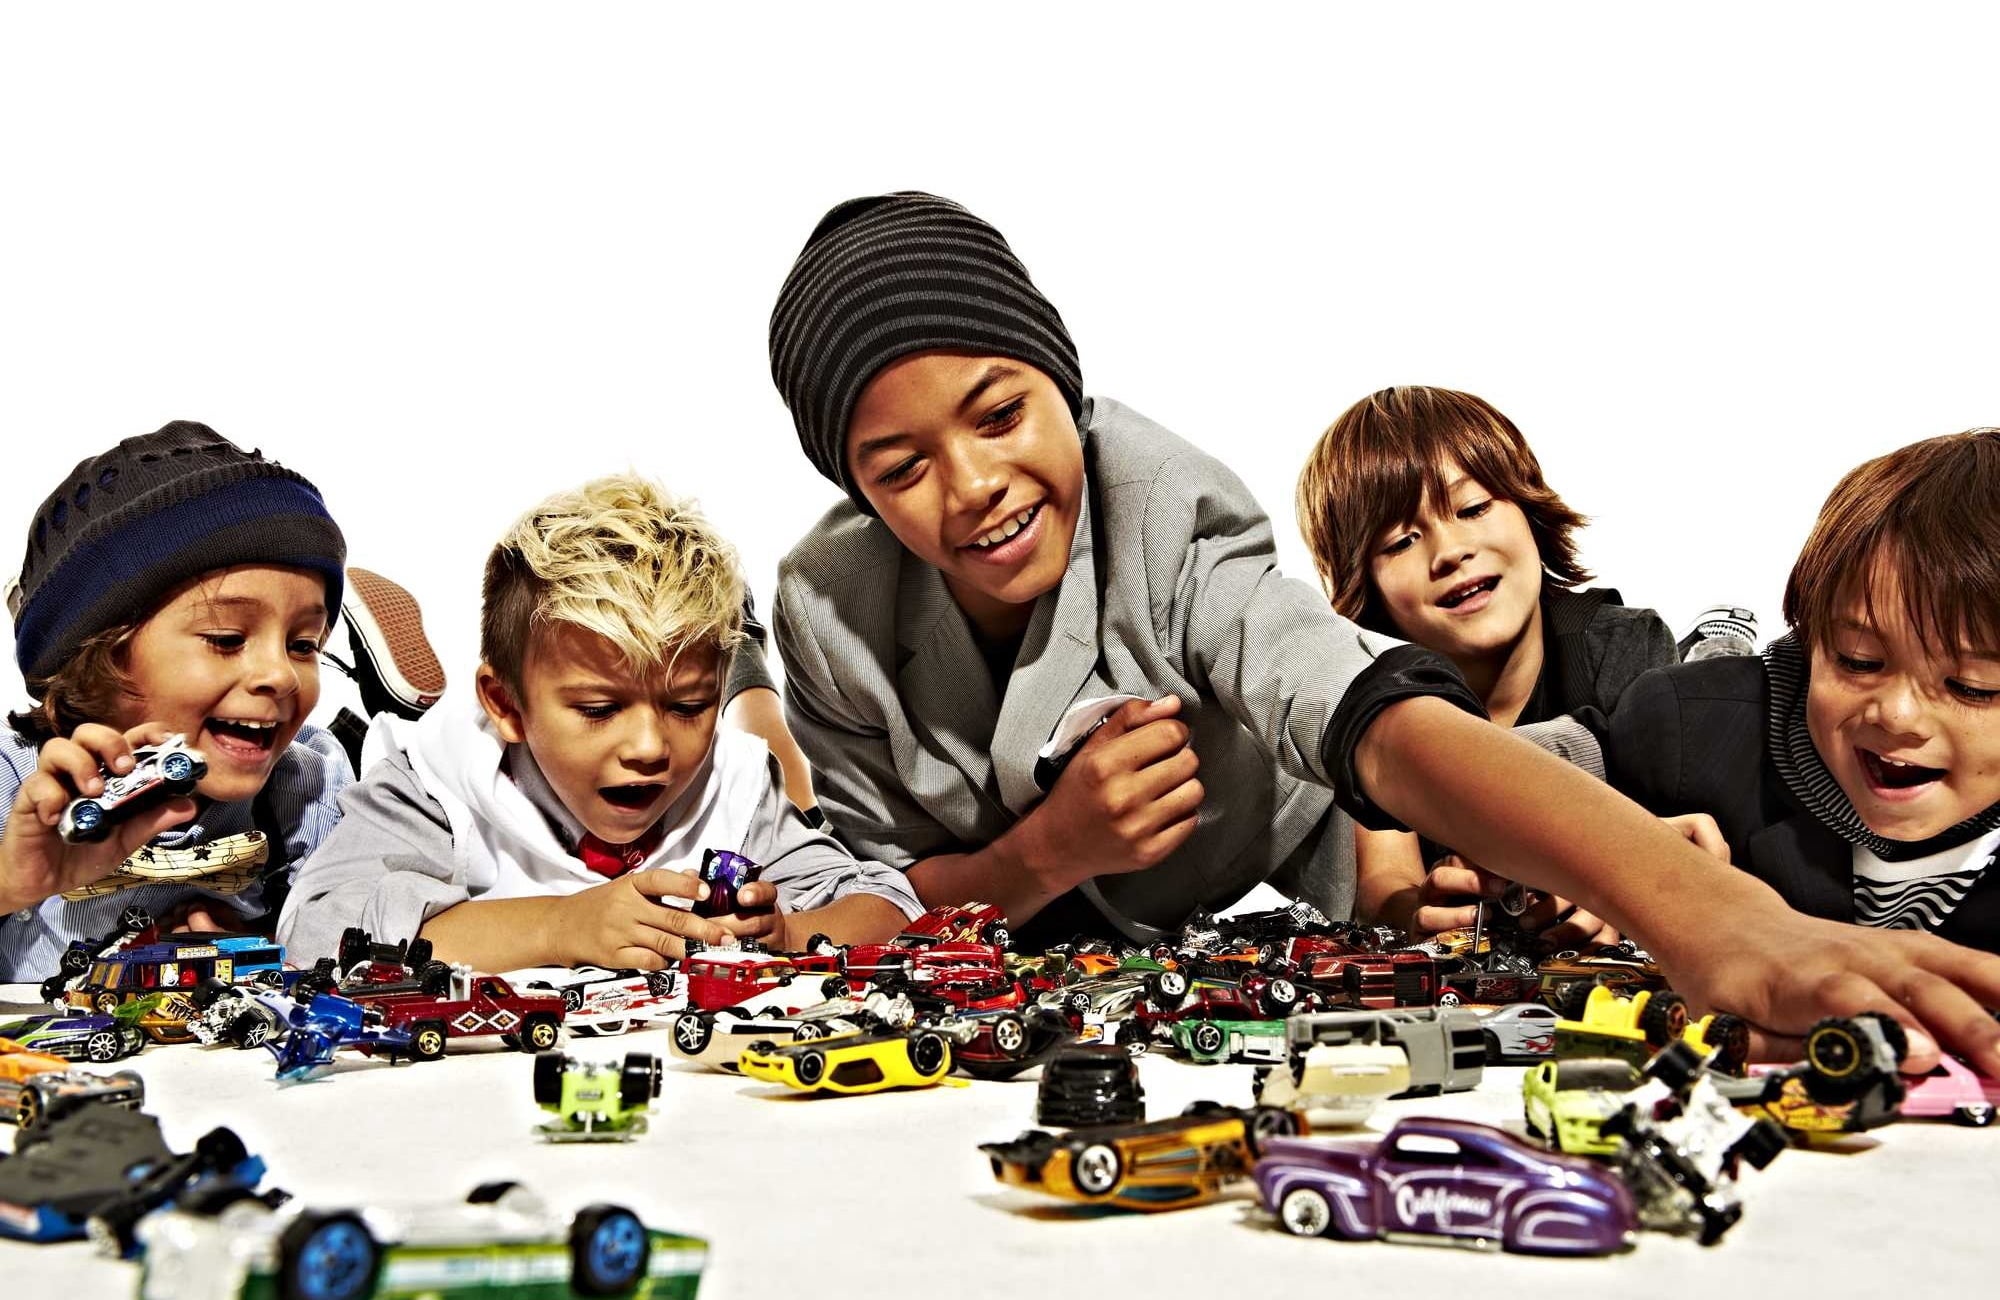 kids playing with hot wheel cars of various colors